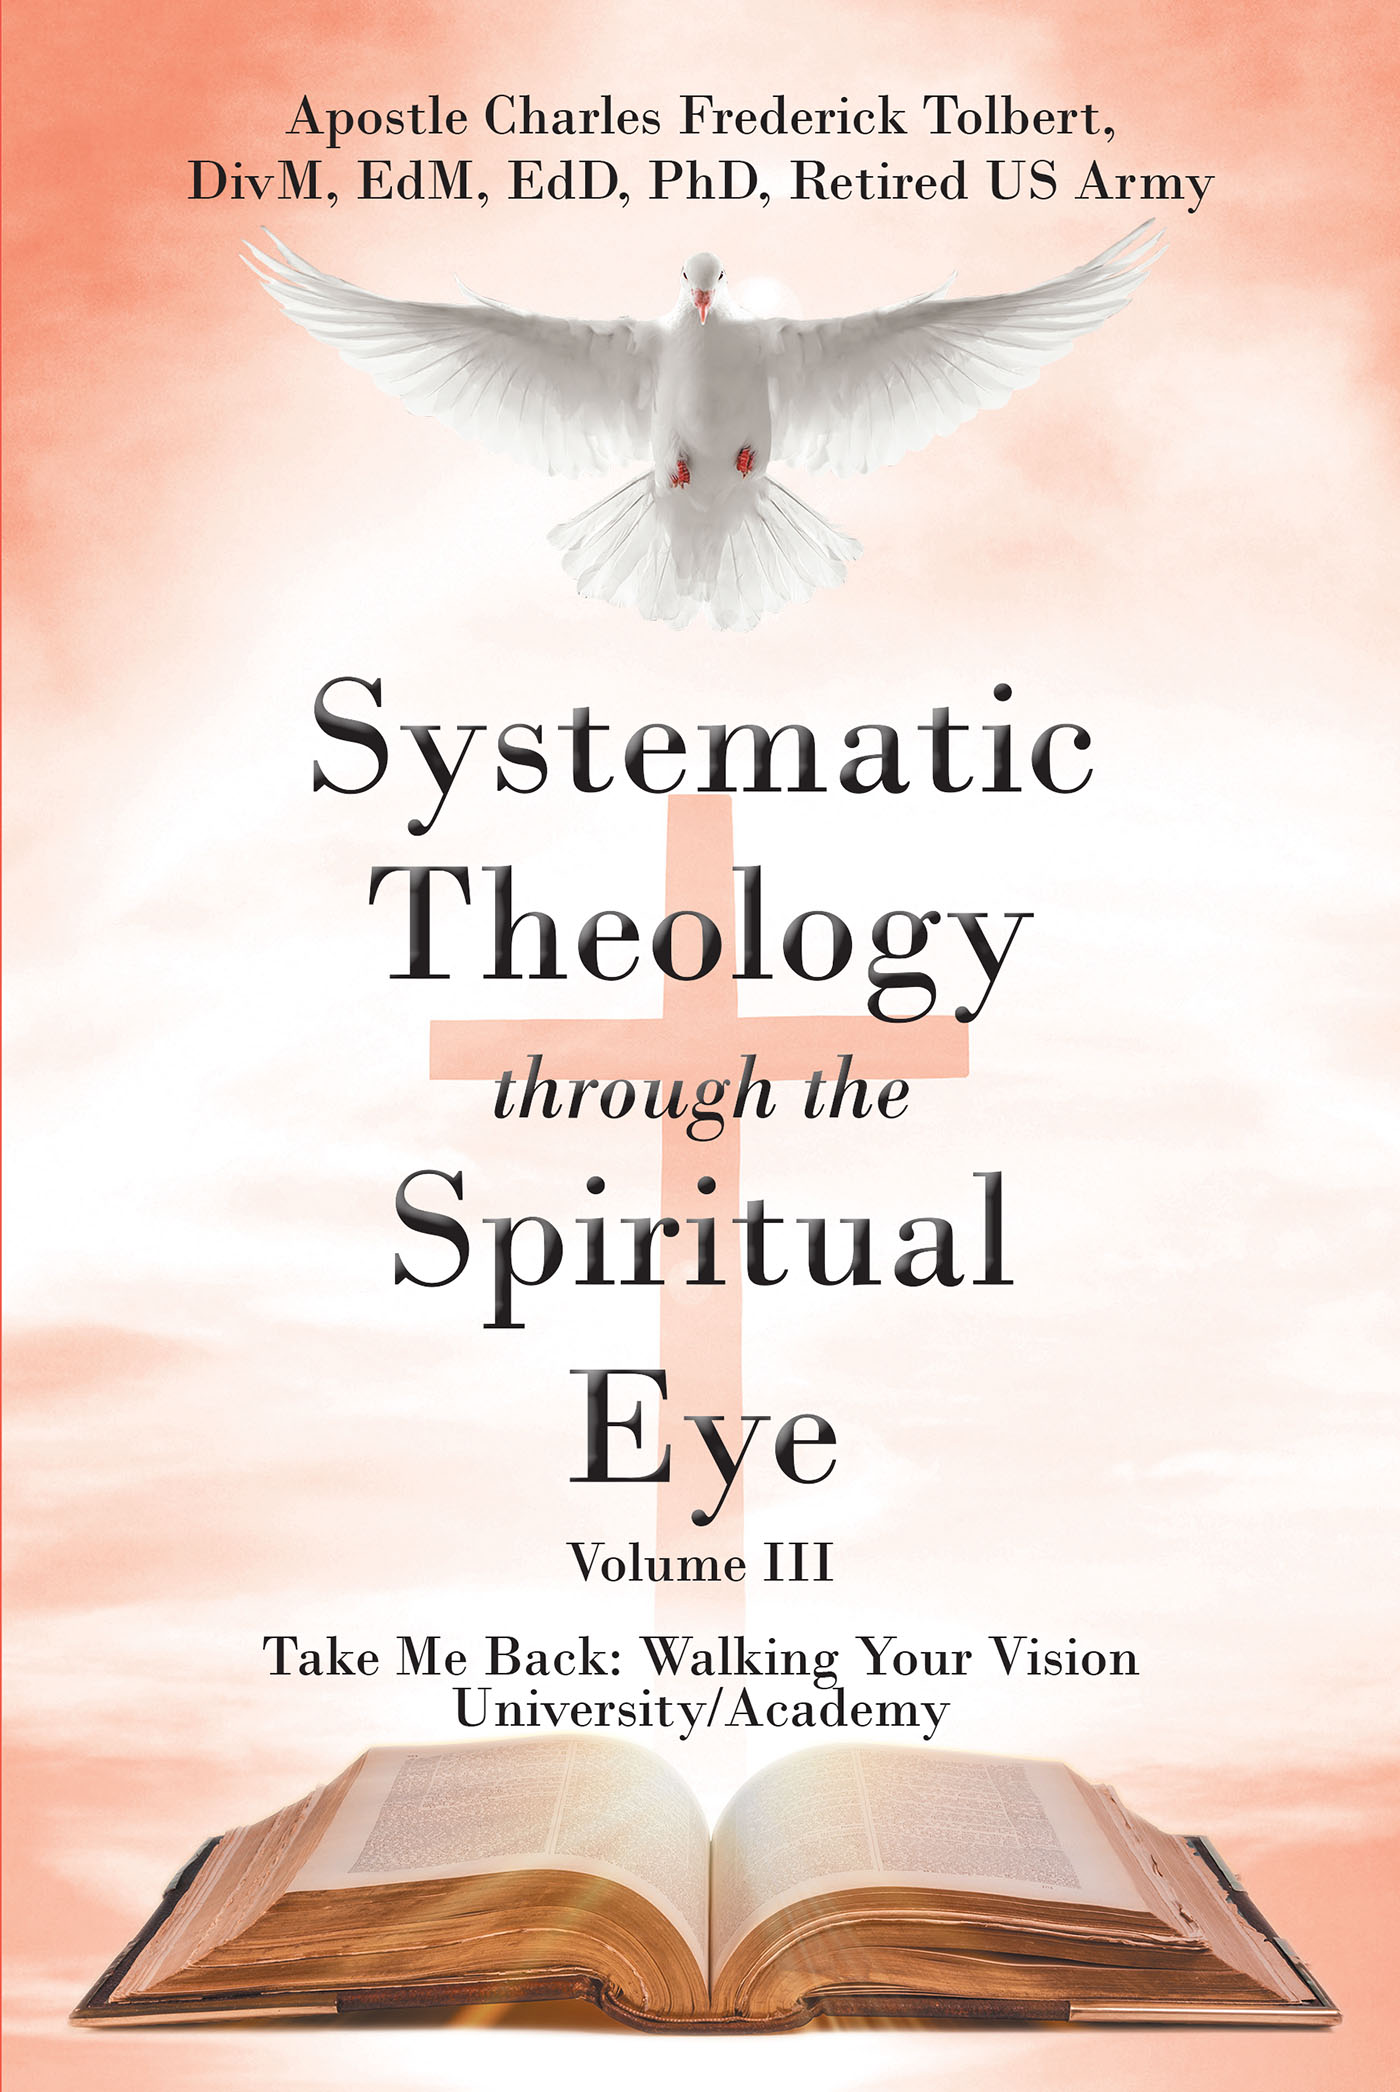 Apostle Charles Frederick Tolbert’s Newly Released, "Systematic Theology Through the Spiritual Eye Volume III," is a Continuation of an Informative Presentation